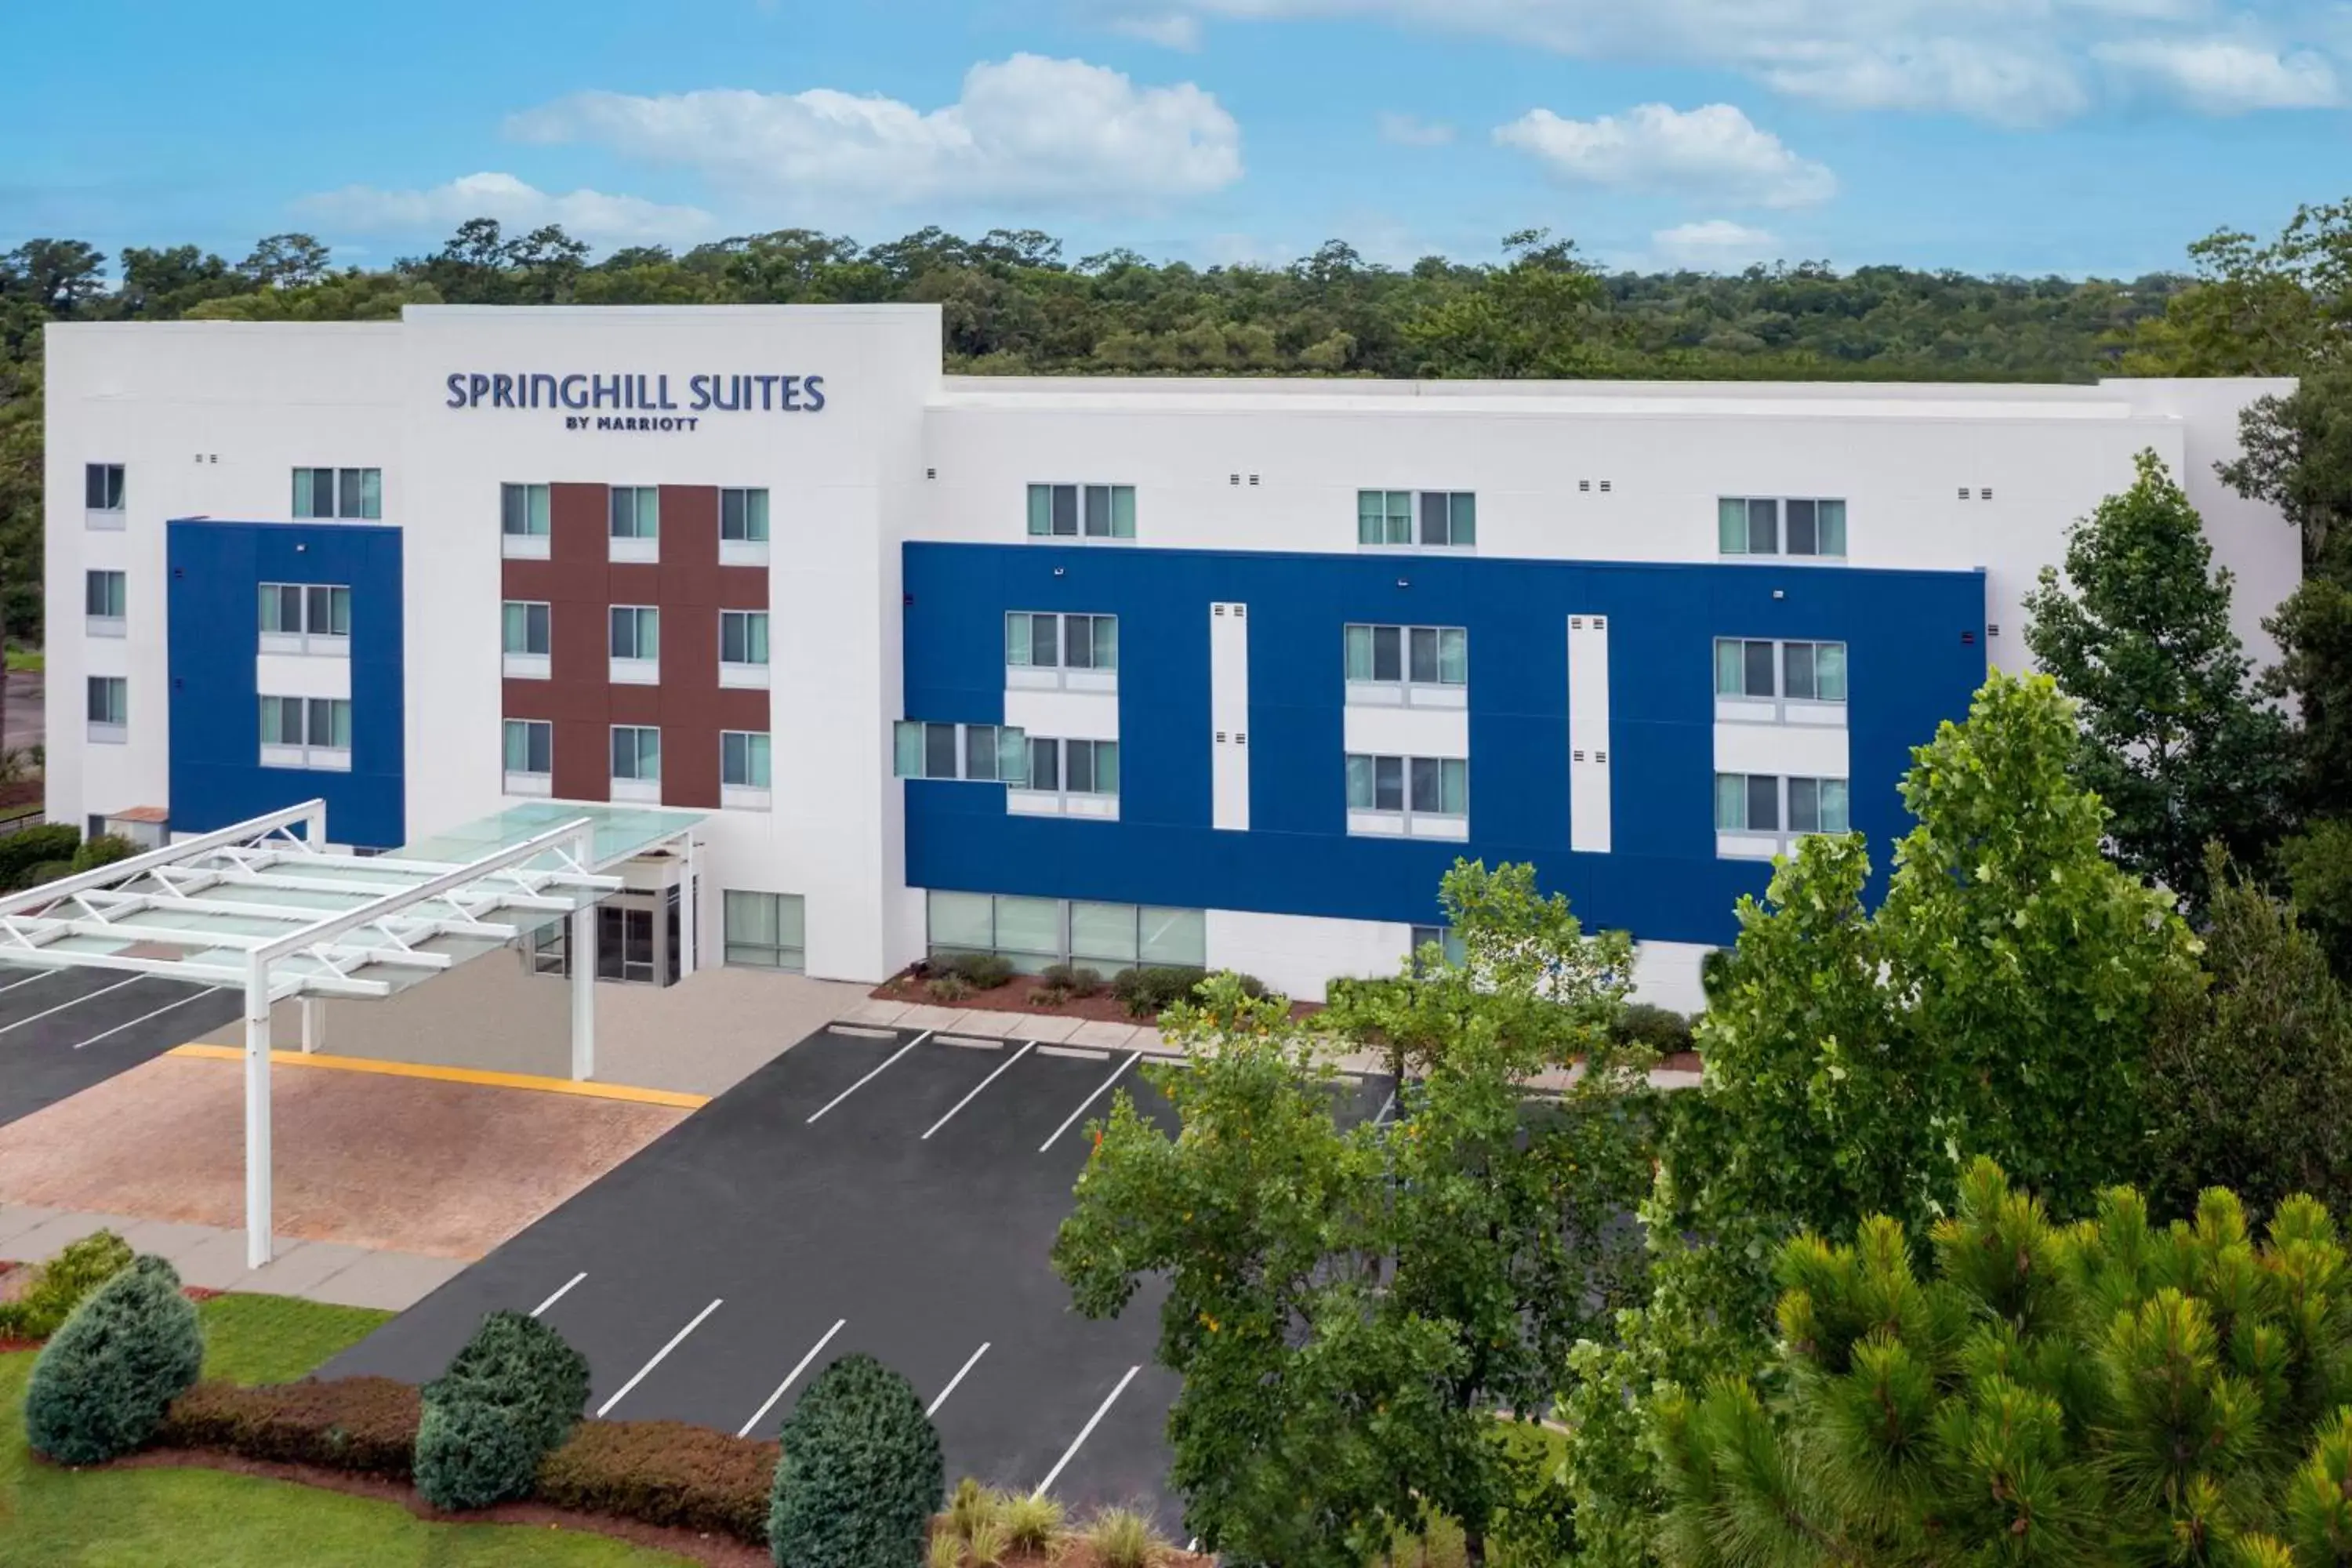 Property Building in SpringHill Suites Tallahassee Central